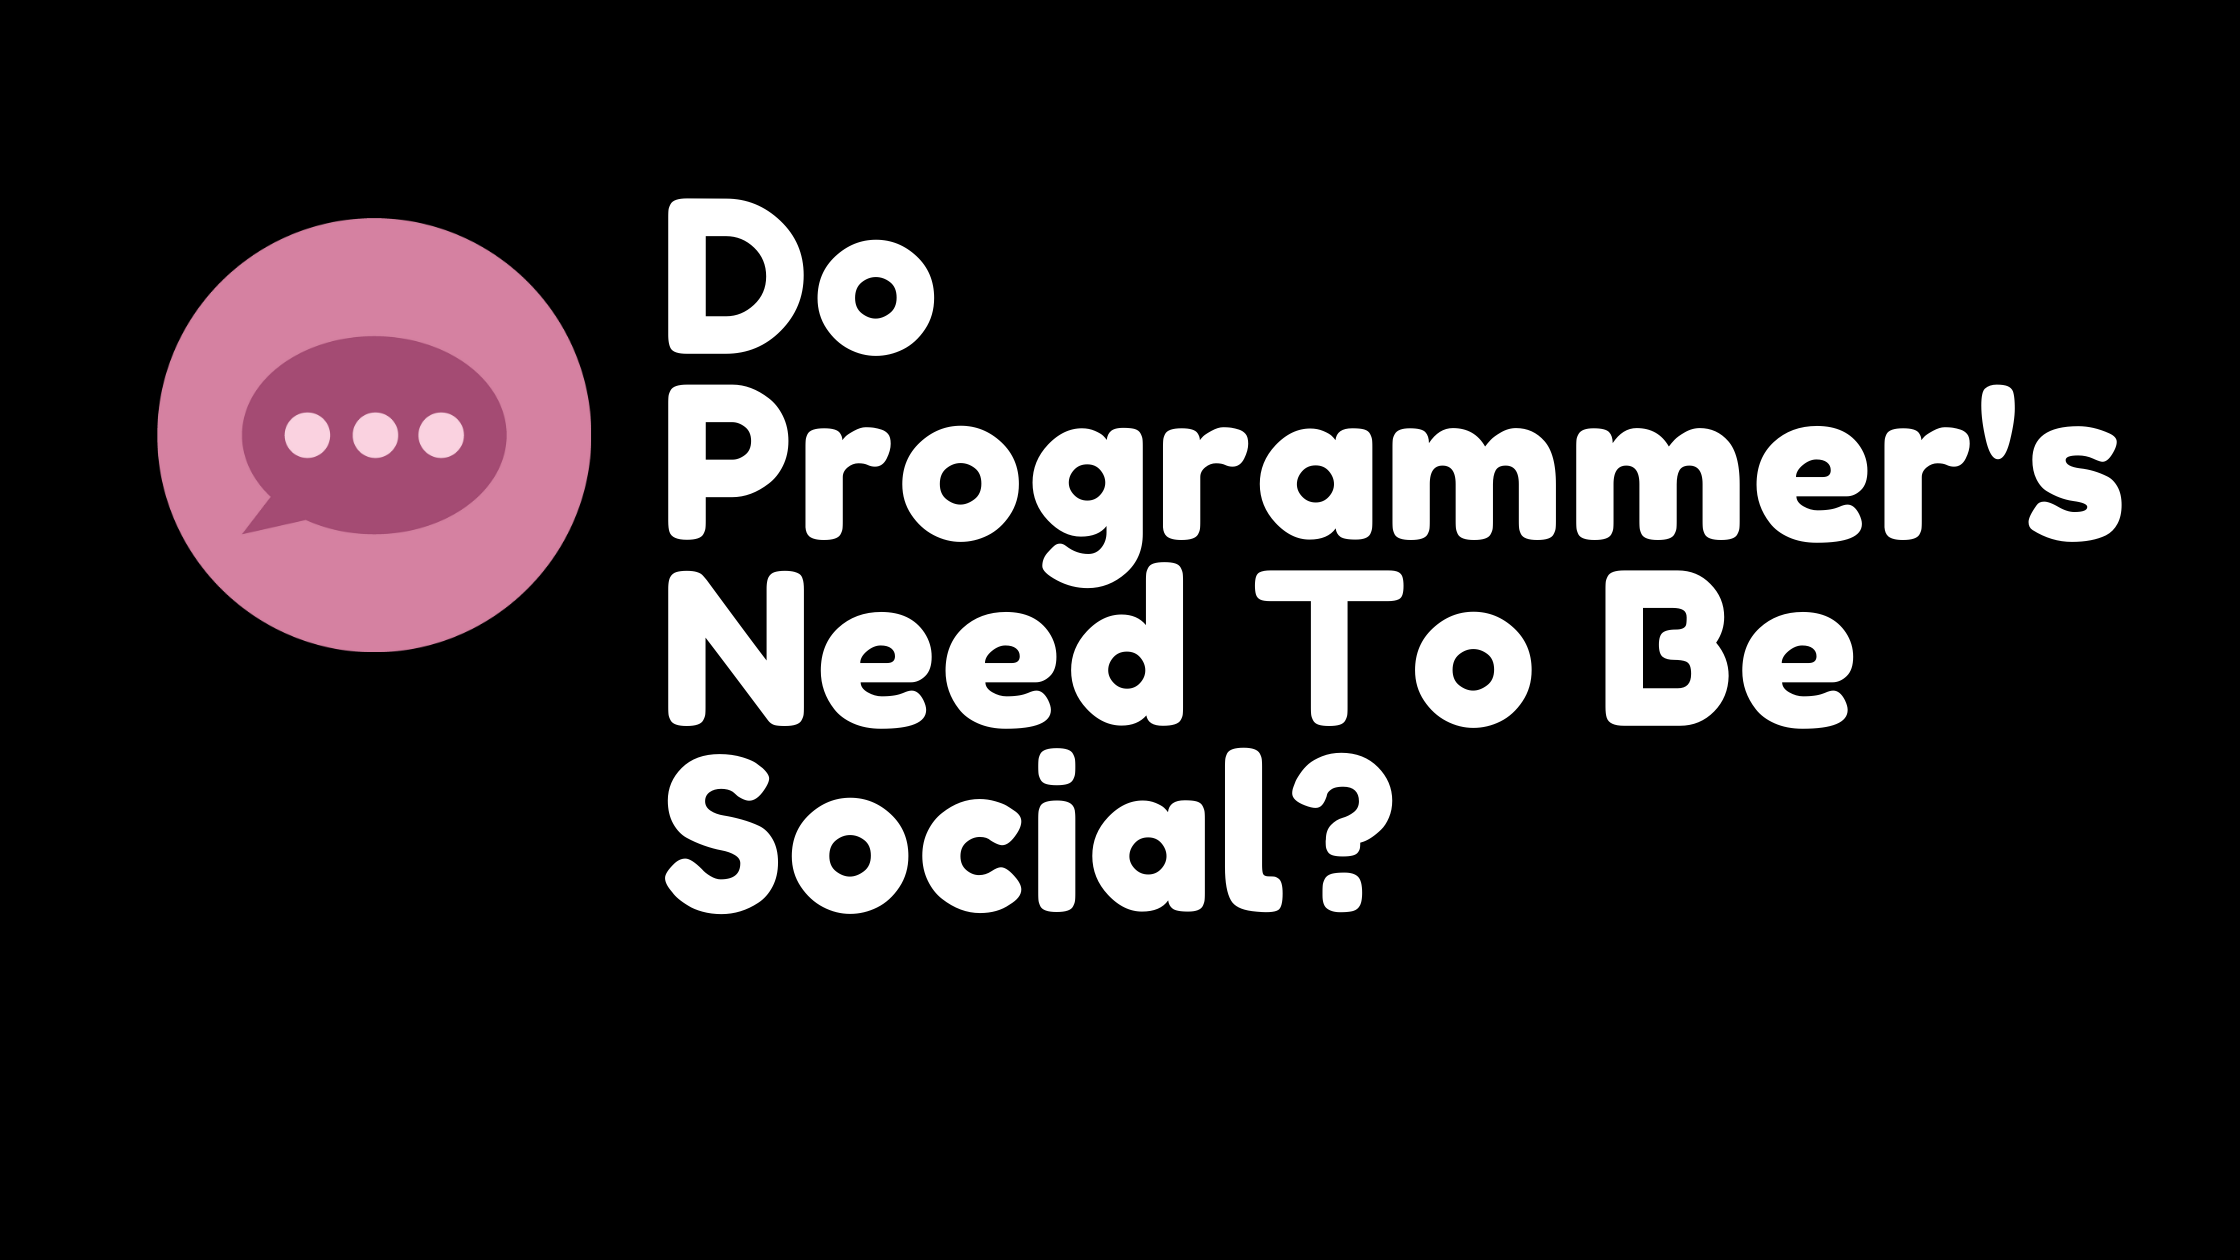 Do programmer's need to be social?